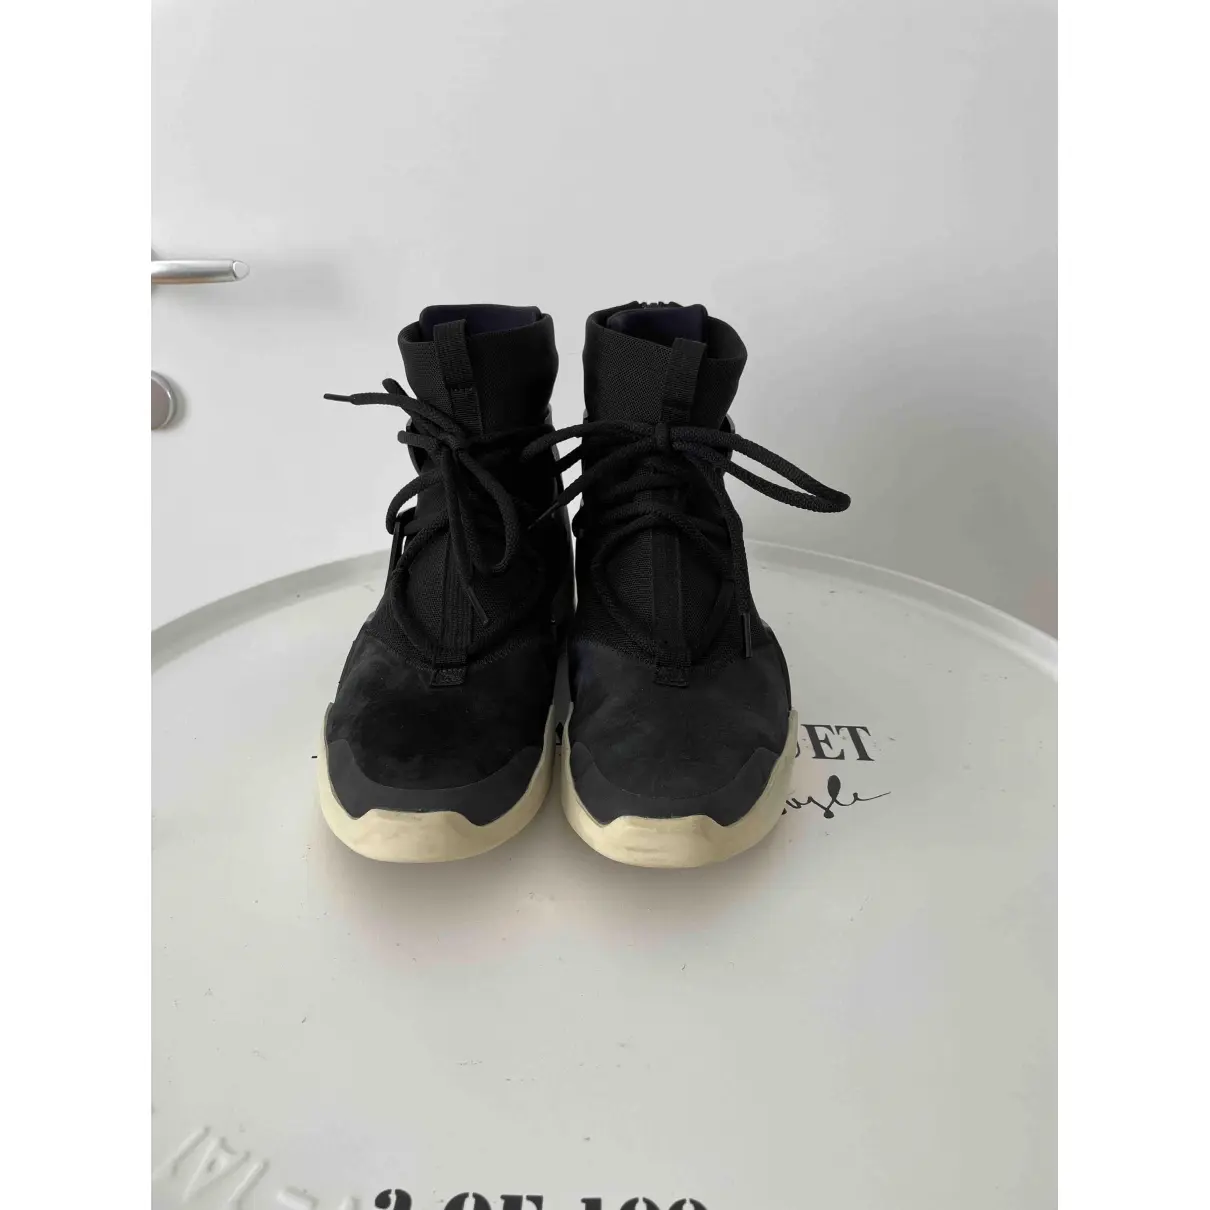 Buy Nike x Fear of God High trainers online